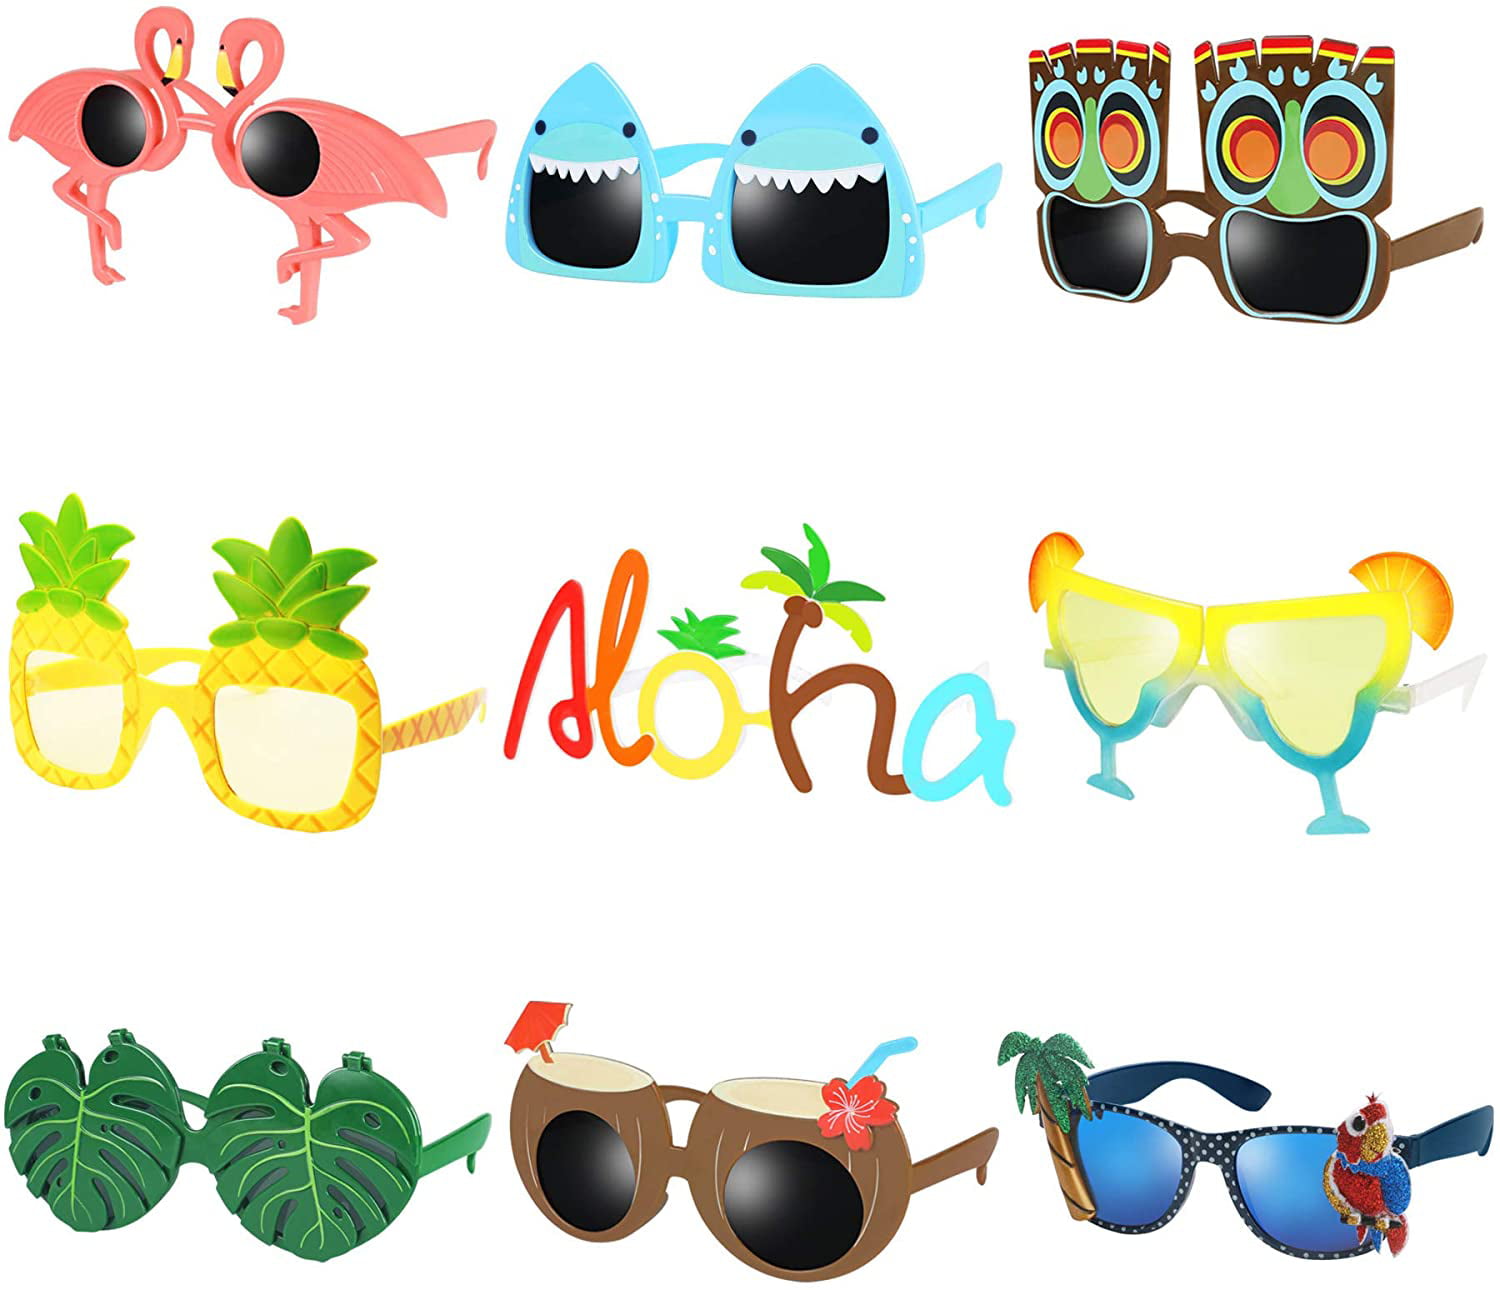 Flamingo Cocktail Palm Tree Sunglasses Glasses Novelty Tropical Beach Party